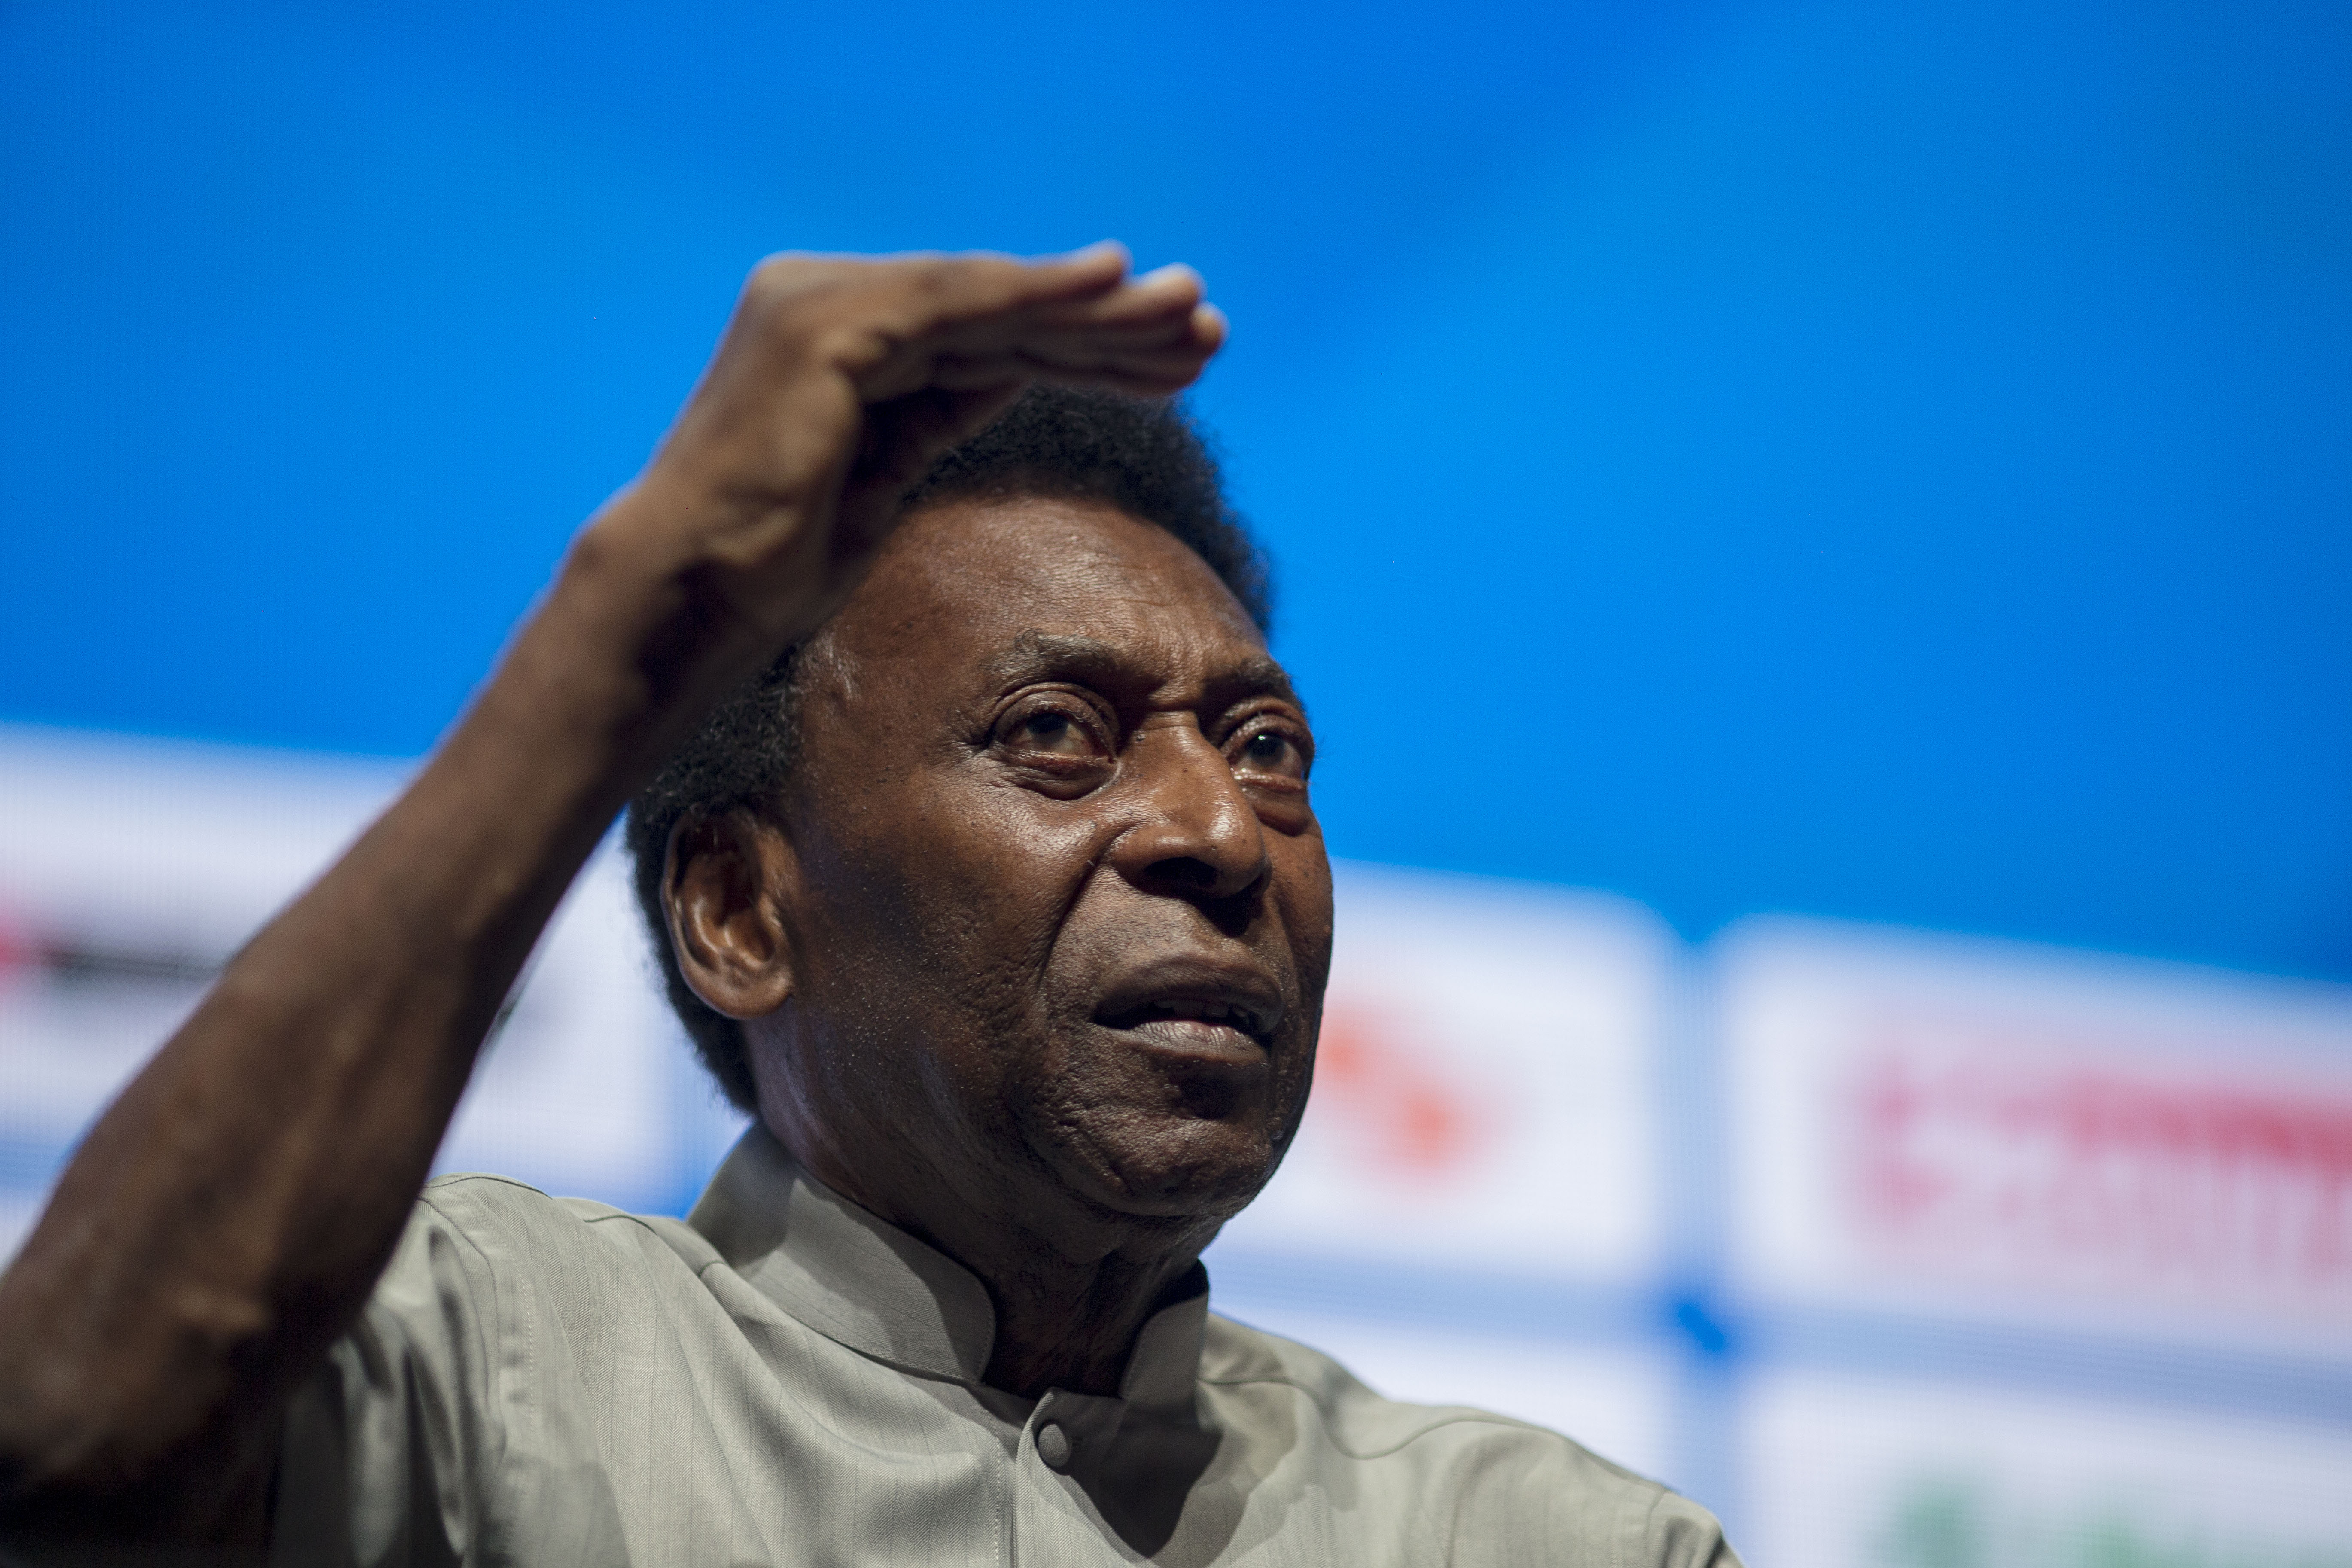 Soccer Star Pelé Refused to Accept His Biological Daughter Even When She Tragically Died of Cancer